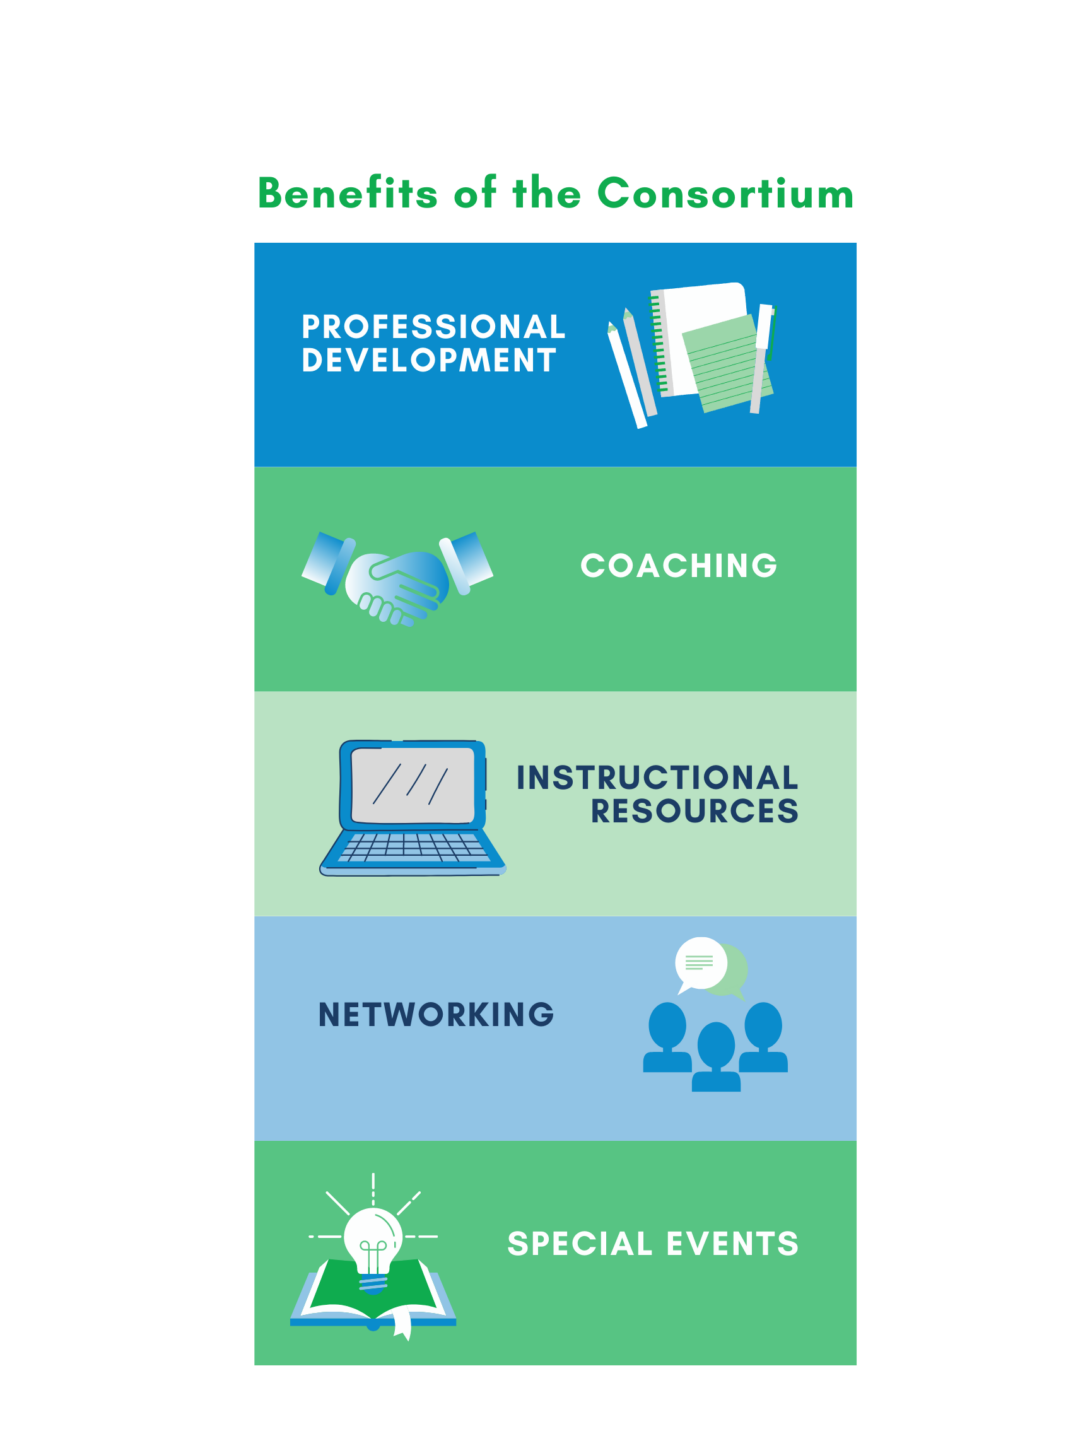 Professional Development Consortium Benefits: PD, Coaching, Instructional Resources, Networking, Special Events